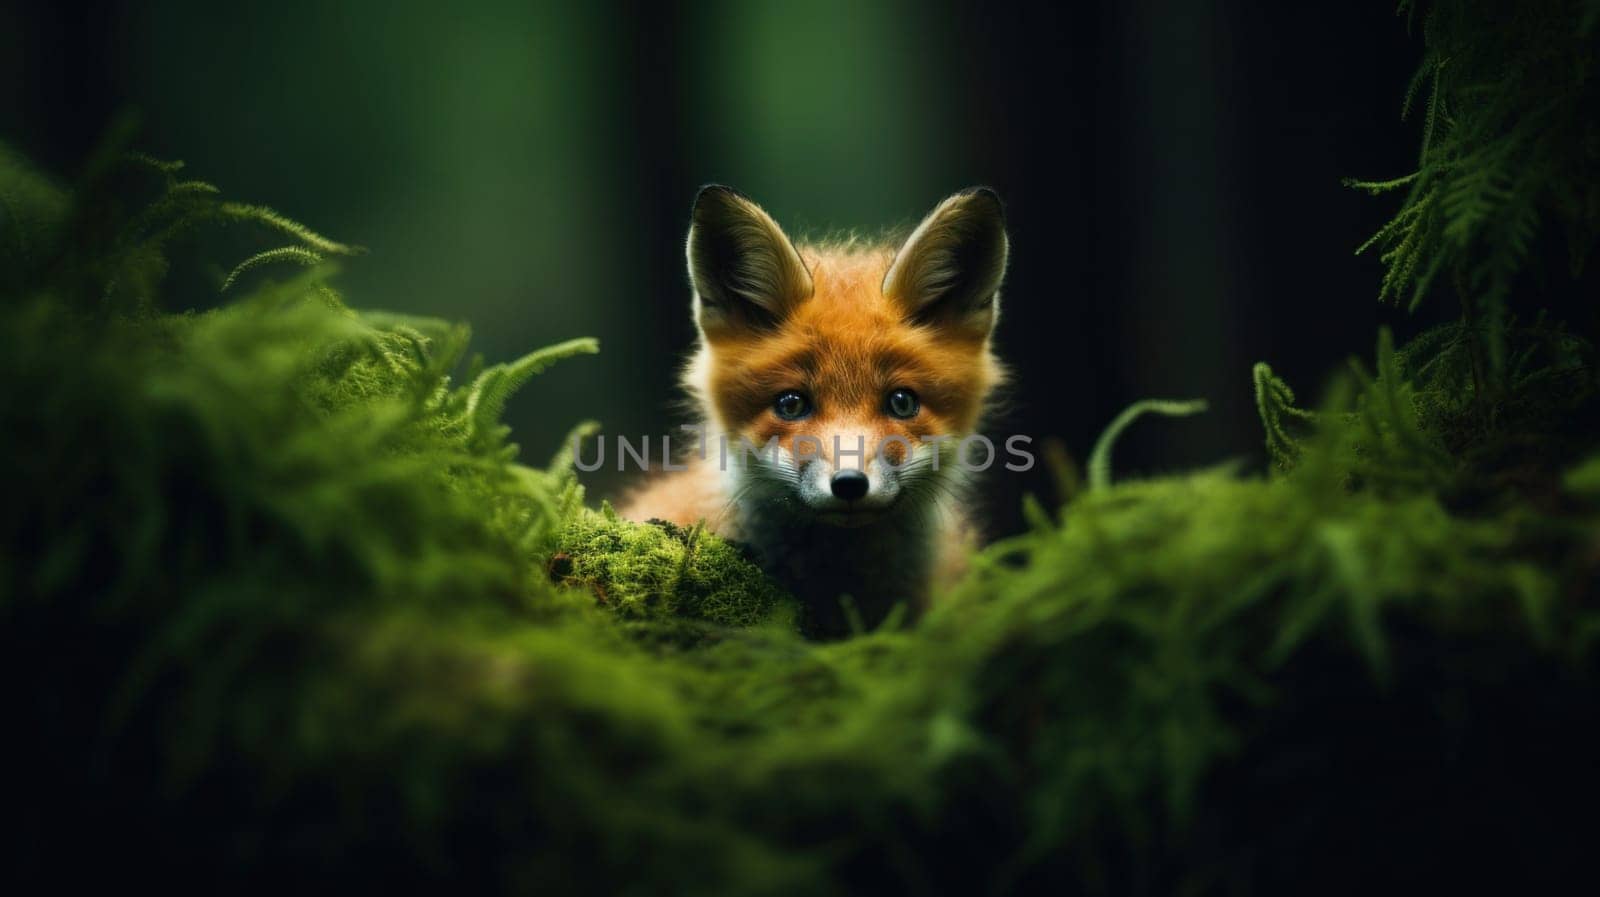 A small fox peeking out from behind a green bush, AI by starush